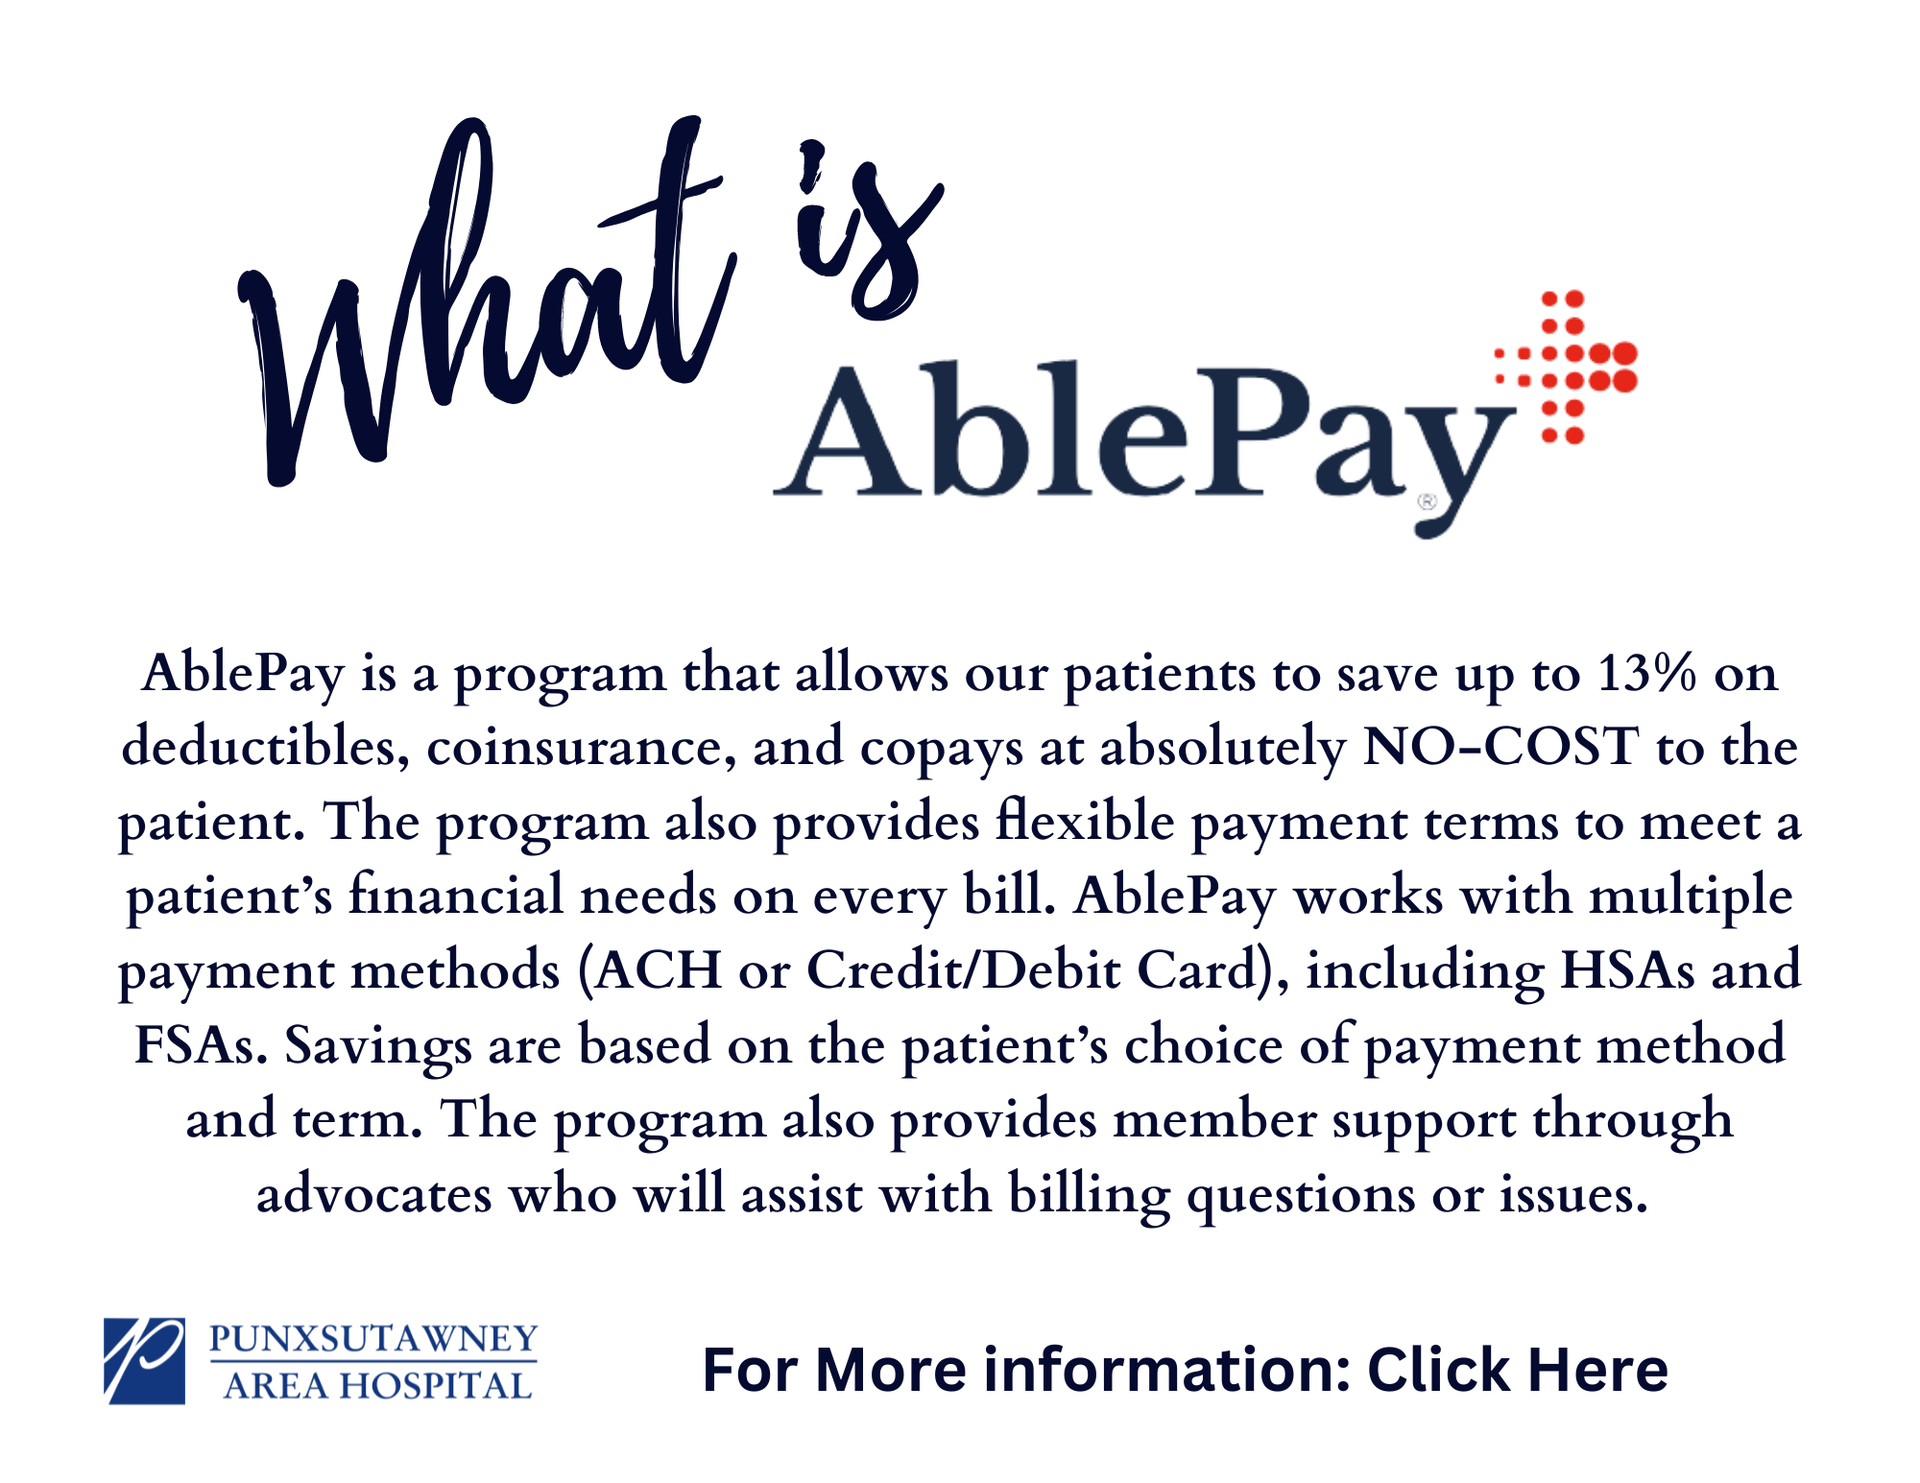 Able Pay